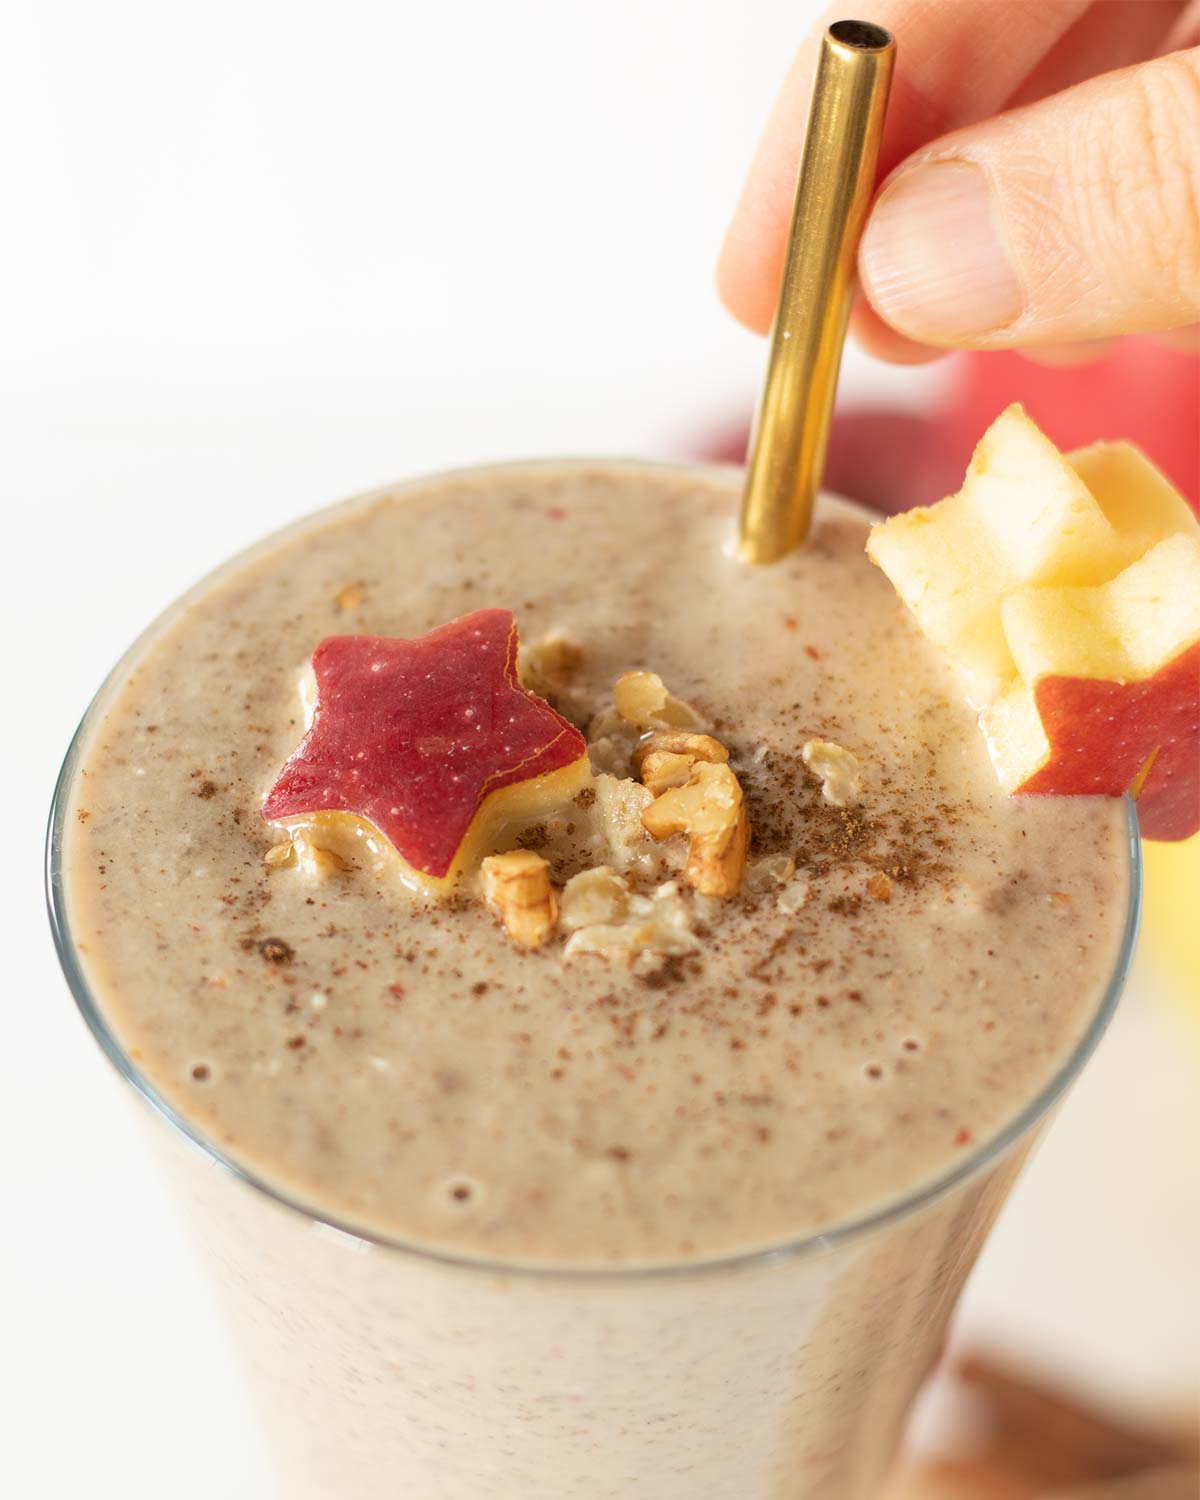 Apple peanut butter oatmeal smoothie with walnuts and cinnamon.